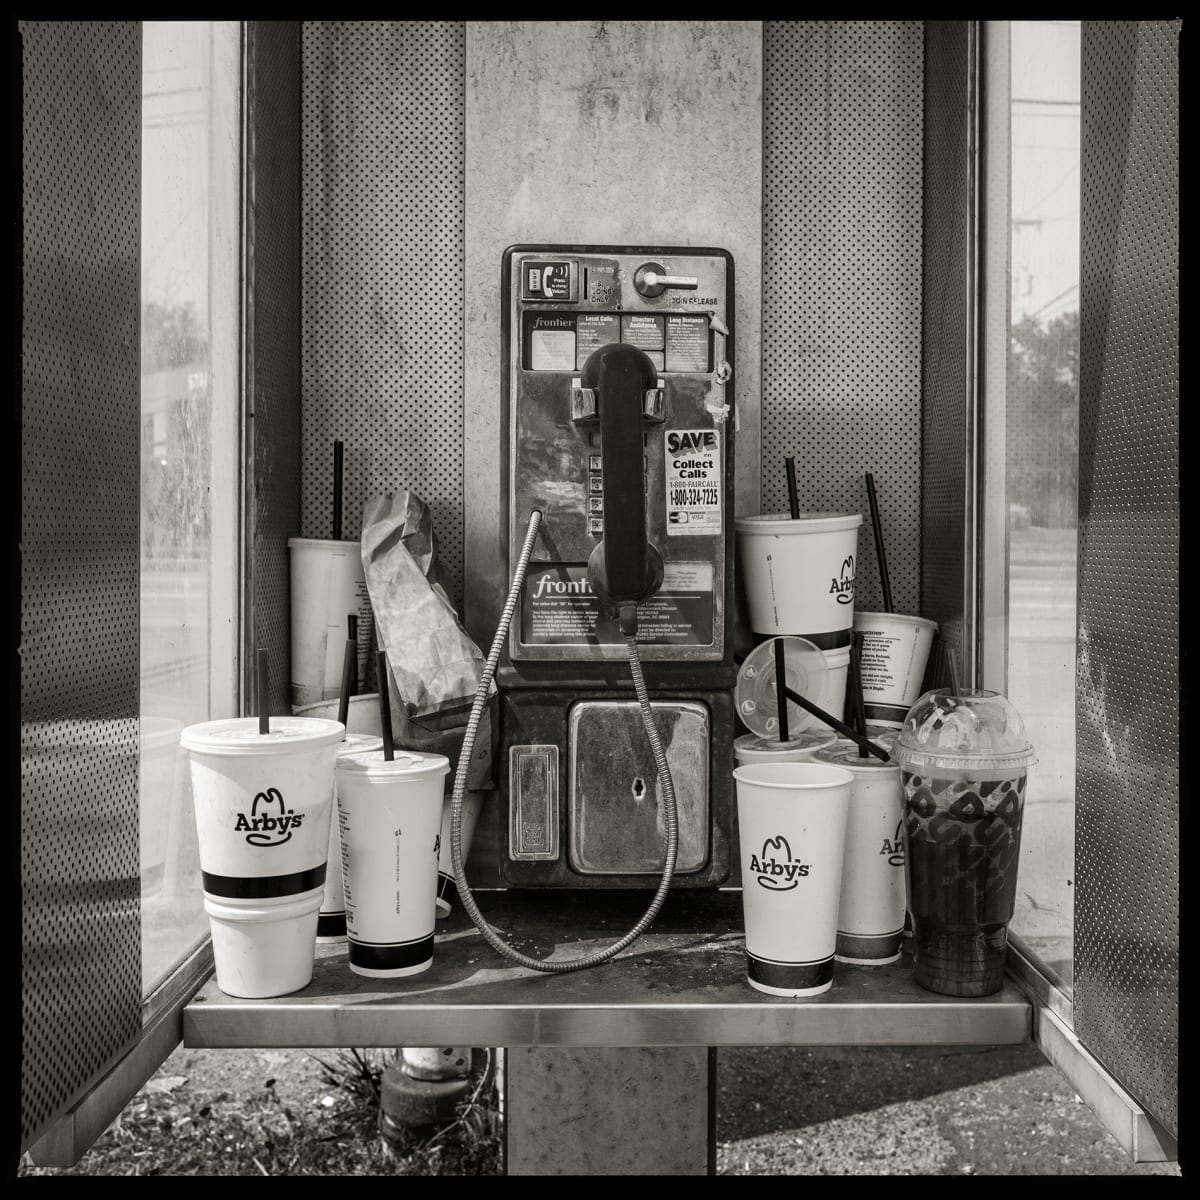 585.427.9848 – Stoney’s Plaza, 2852 West Henrietta Road, Henrietta, NY 14623 by Eric T. Kunsman  Image: ID: A black and white image shows a close up image of a payphone.  The phone is on the hook.  Used fast food cups surround the phone.